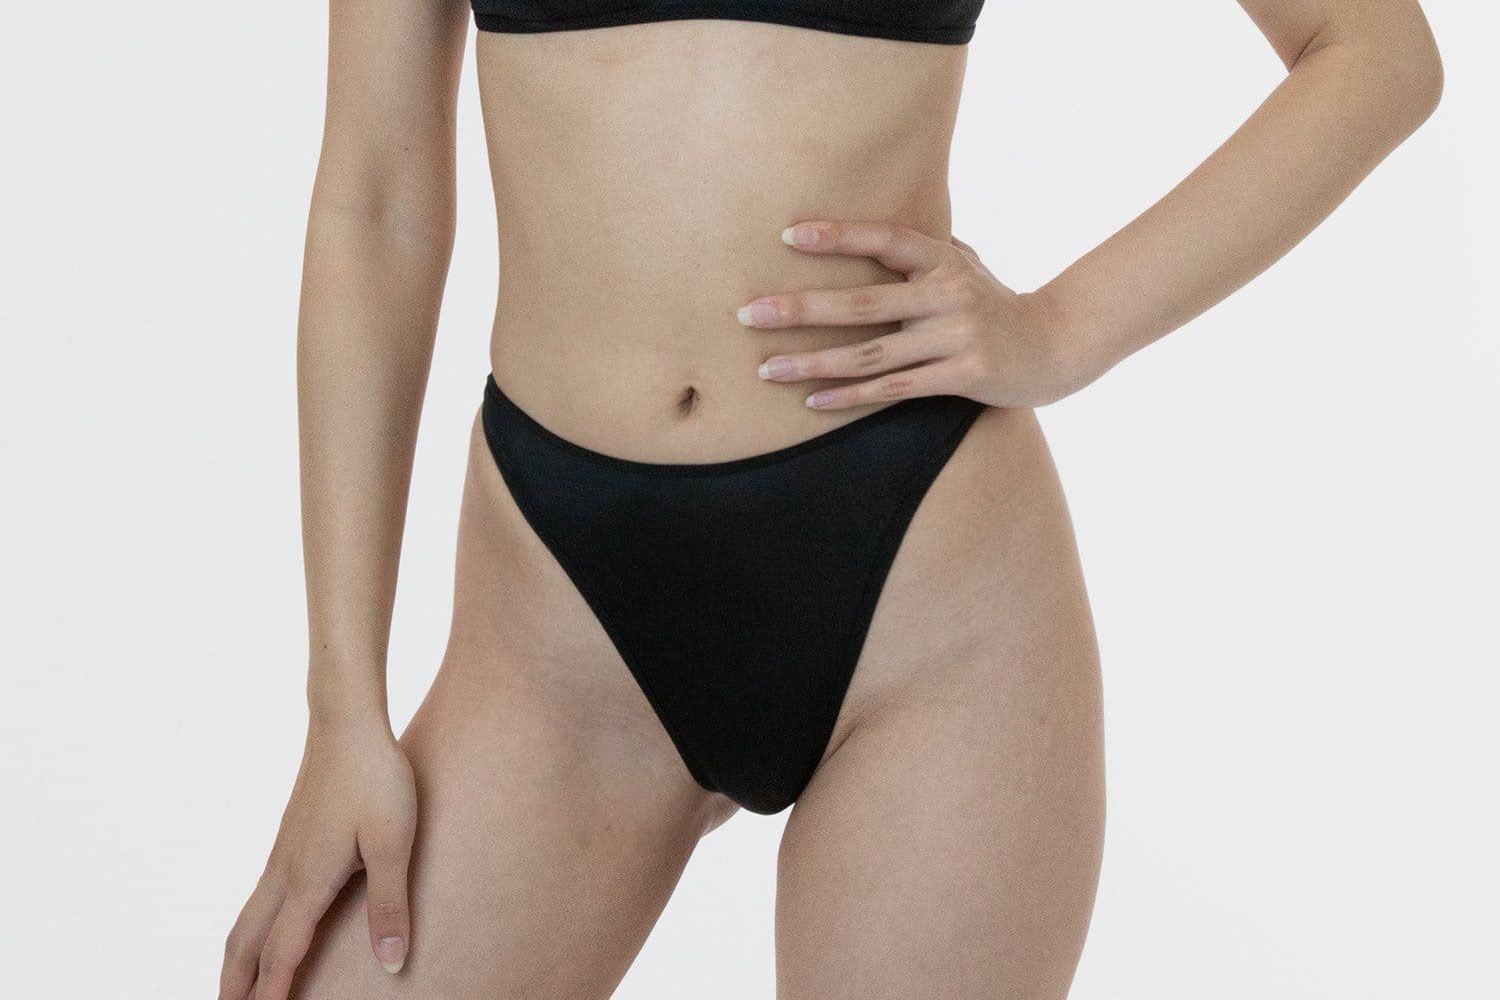 What makes comfortable panties for MTF trans people? - Quora